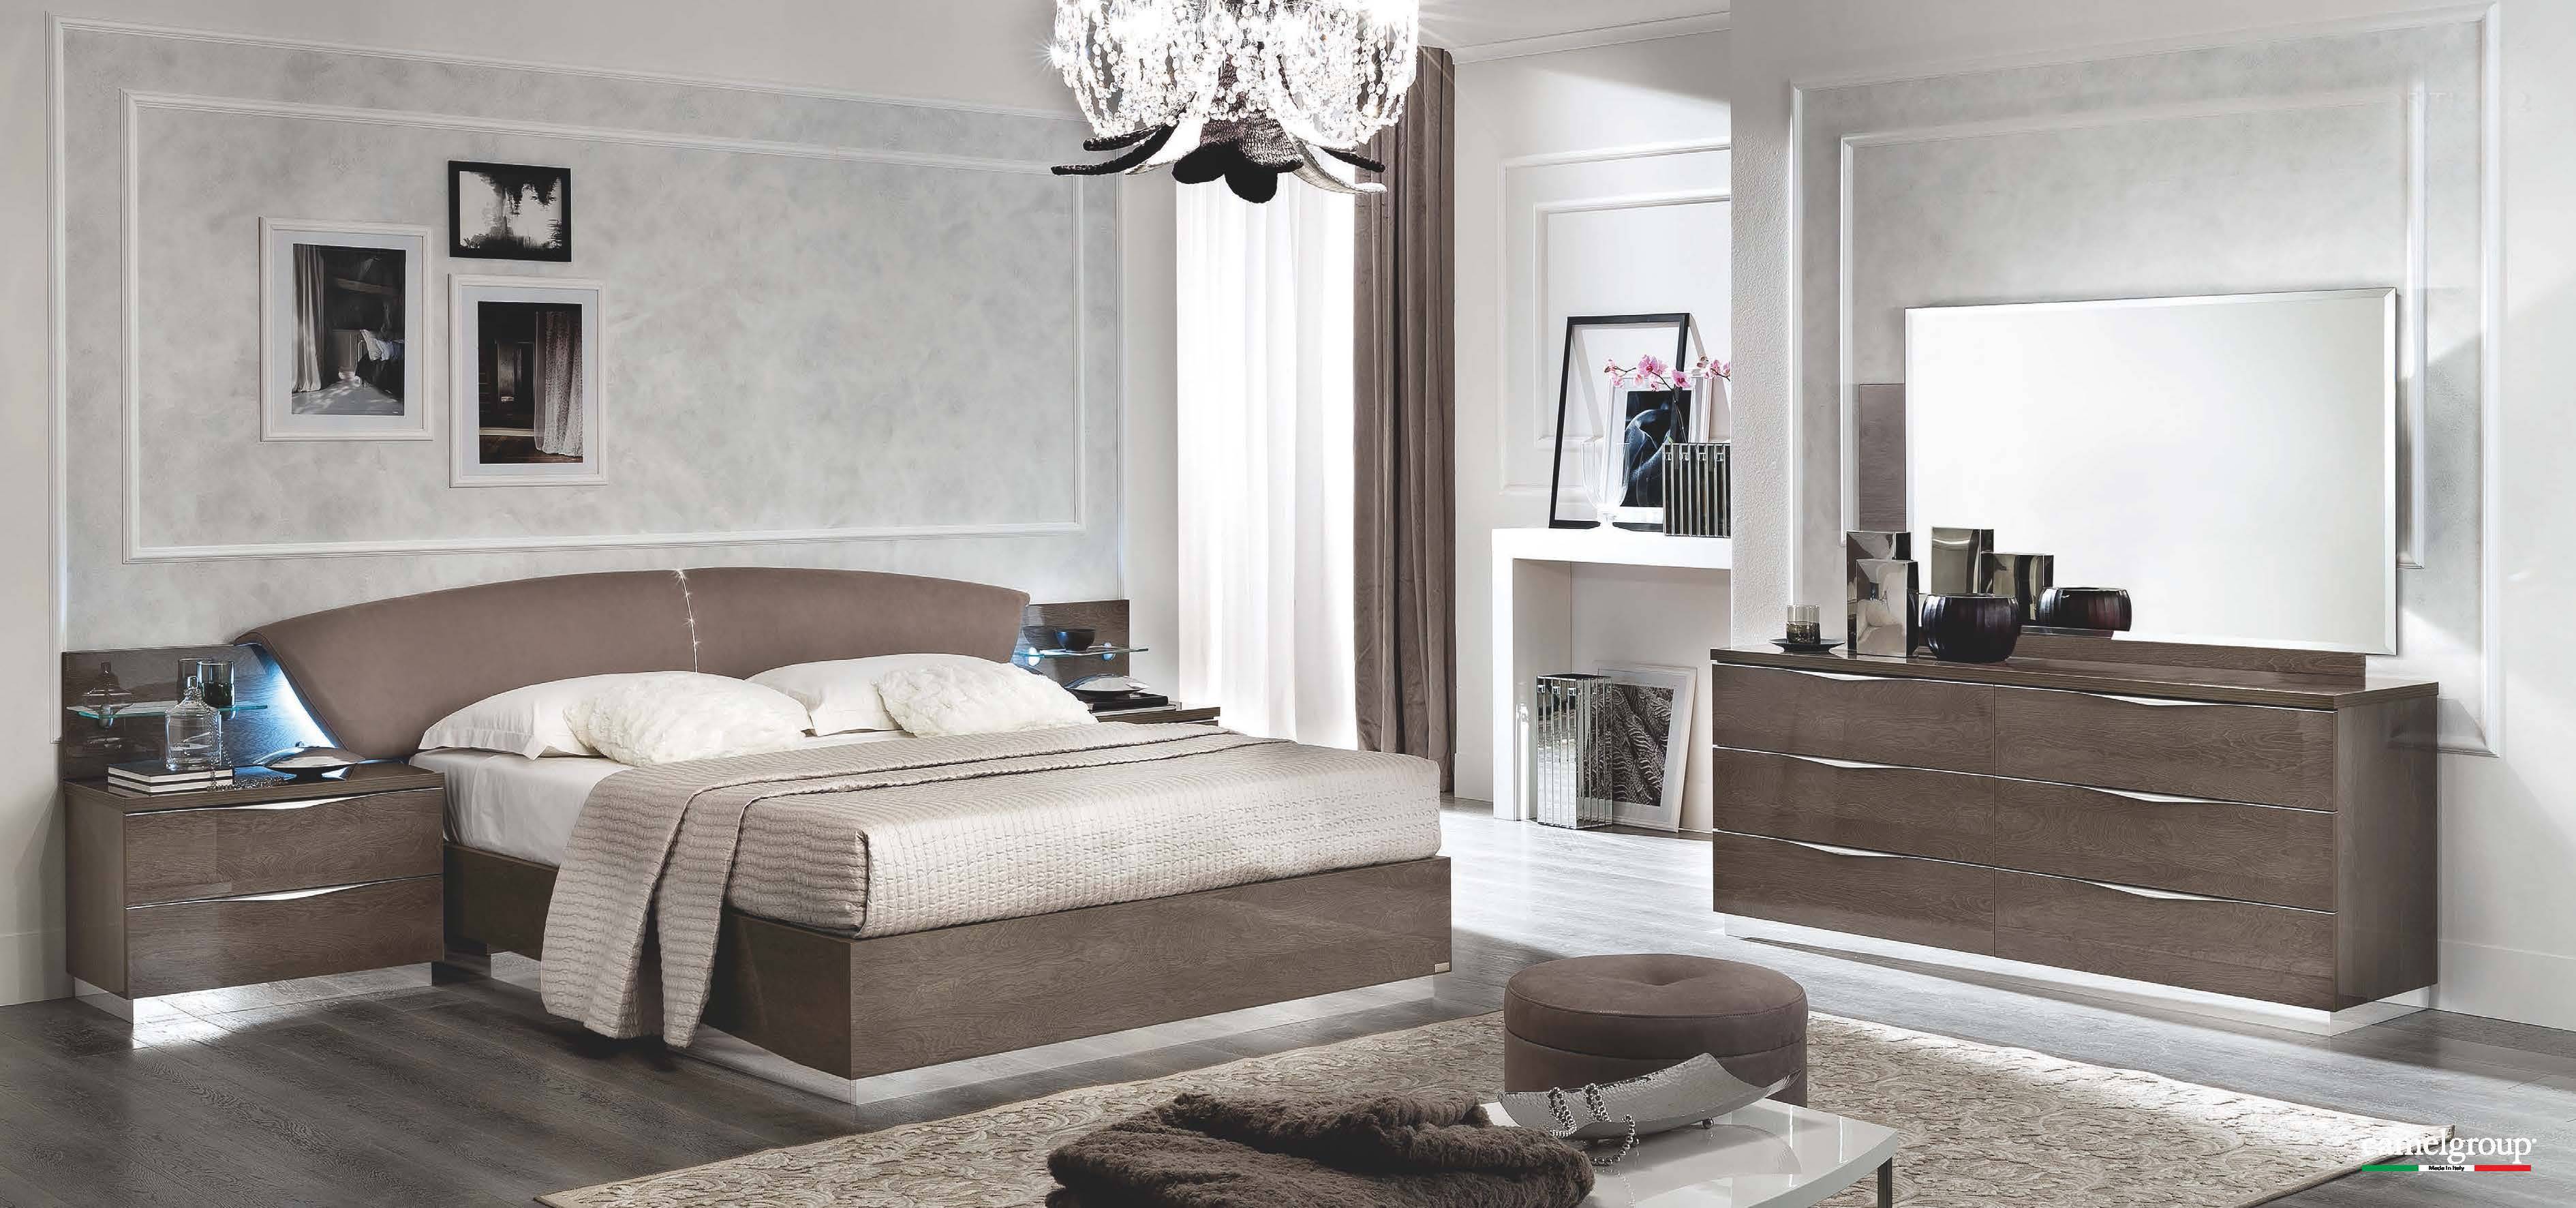 Made in Italy Quality Design Bedroom Furniture Cape Coral Florida ...